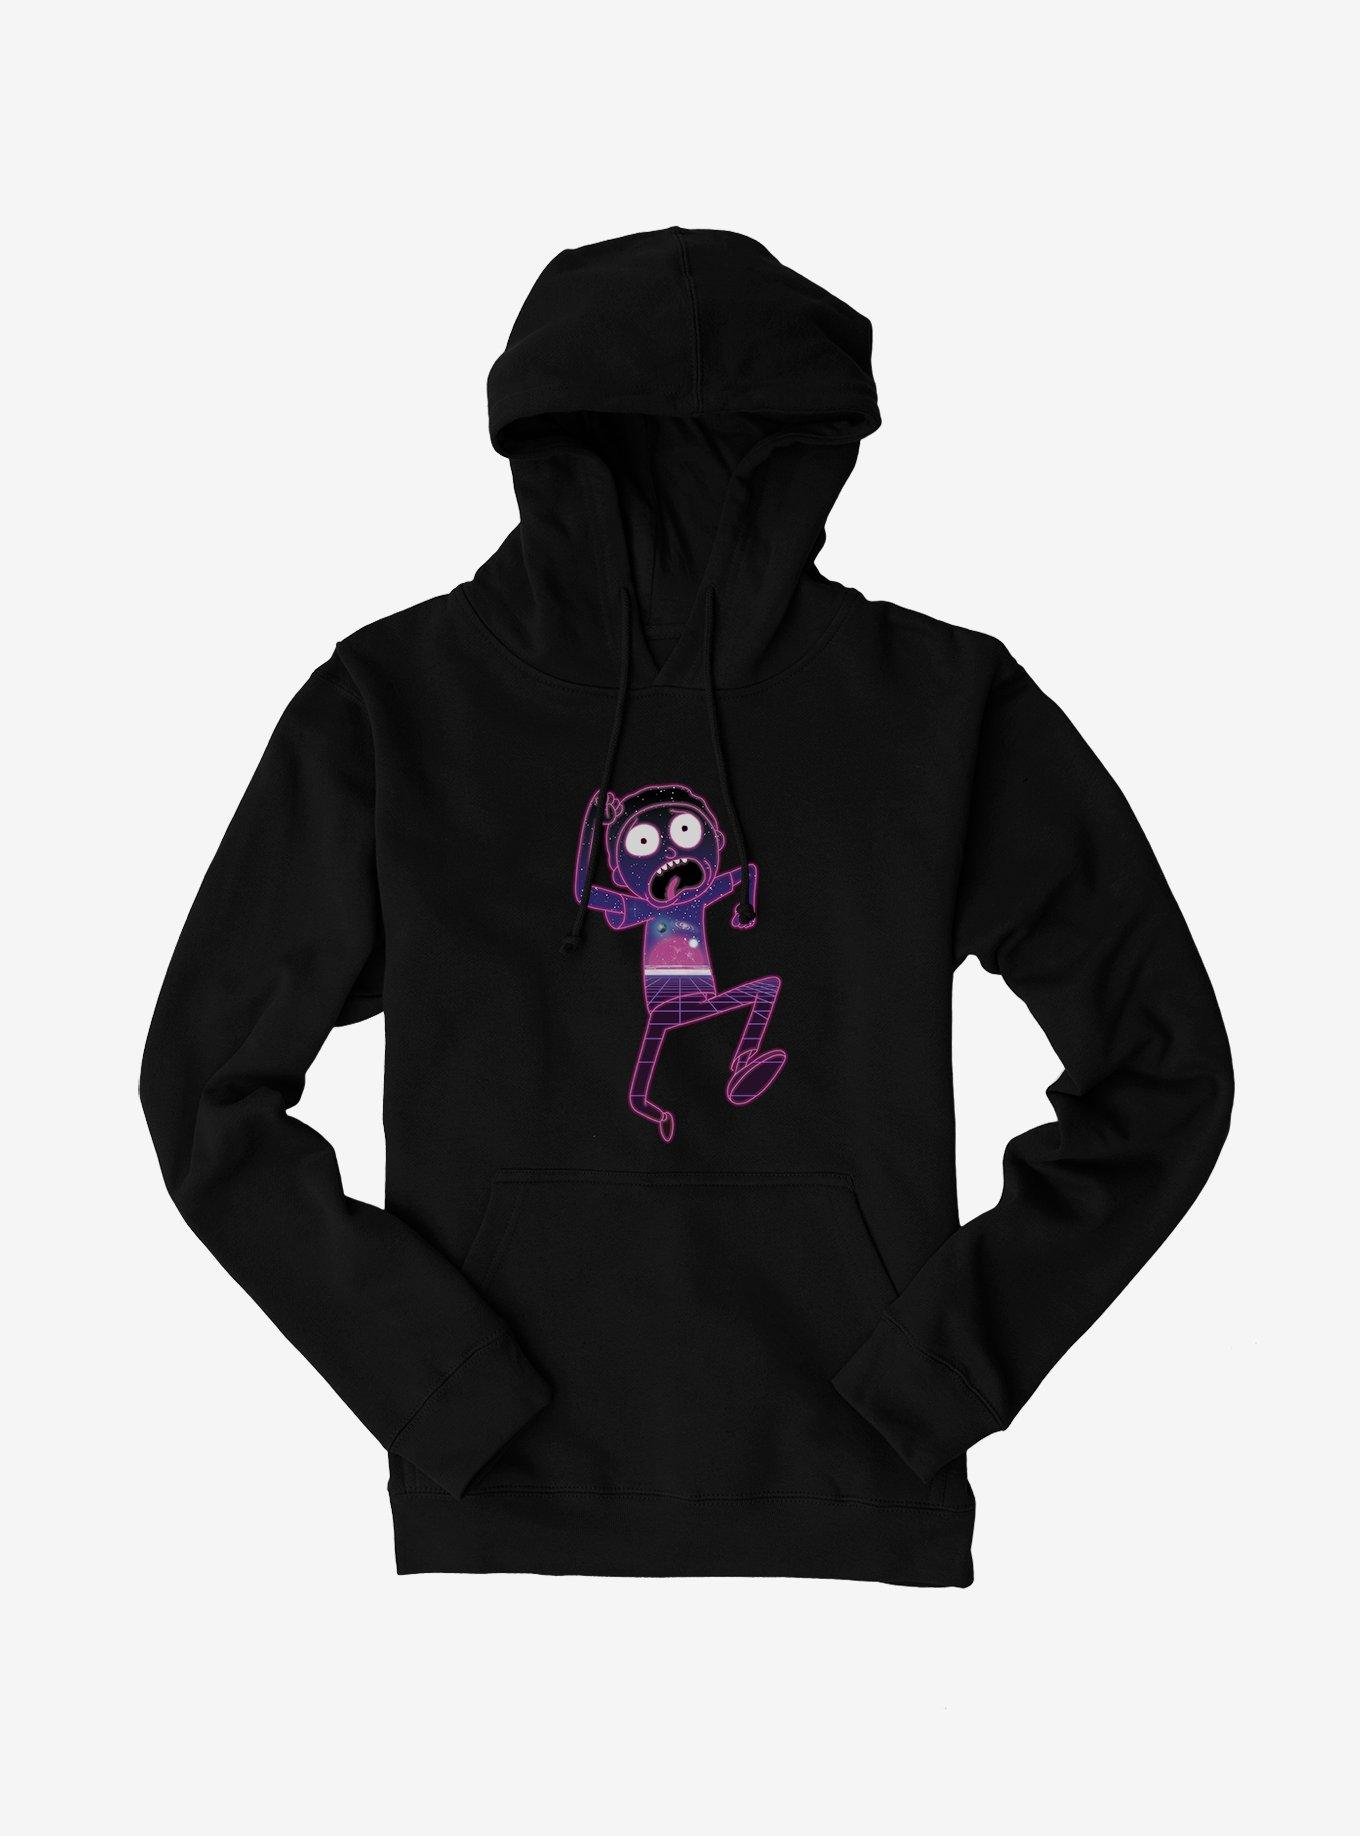 Rick And Morty Running Morty Hoodie, , hi-res